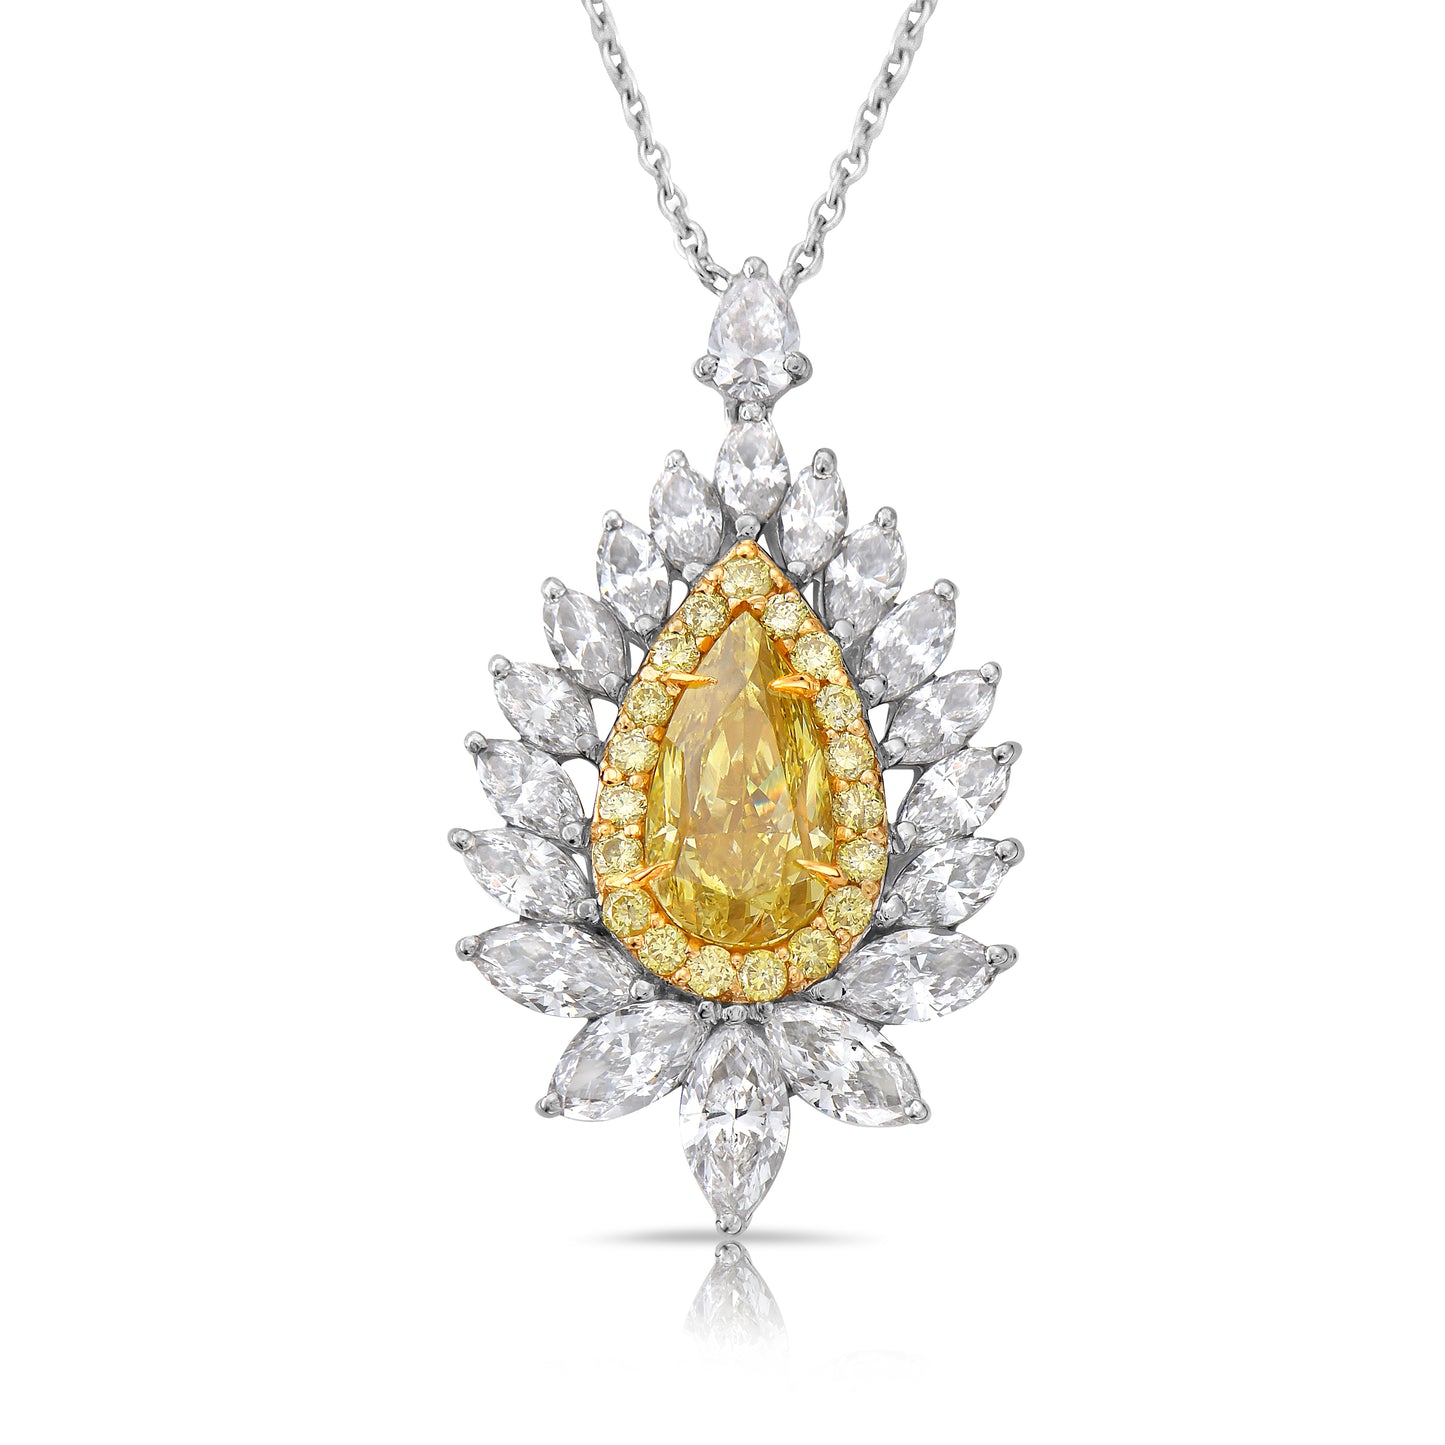 Intense yellow pear shape. Gia certified intense yellow diamond. Yellow diamond necklace. Unique yellow diamond necklace. Yellow diamond pear shape necklace.